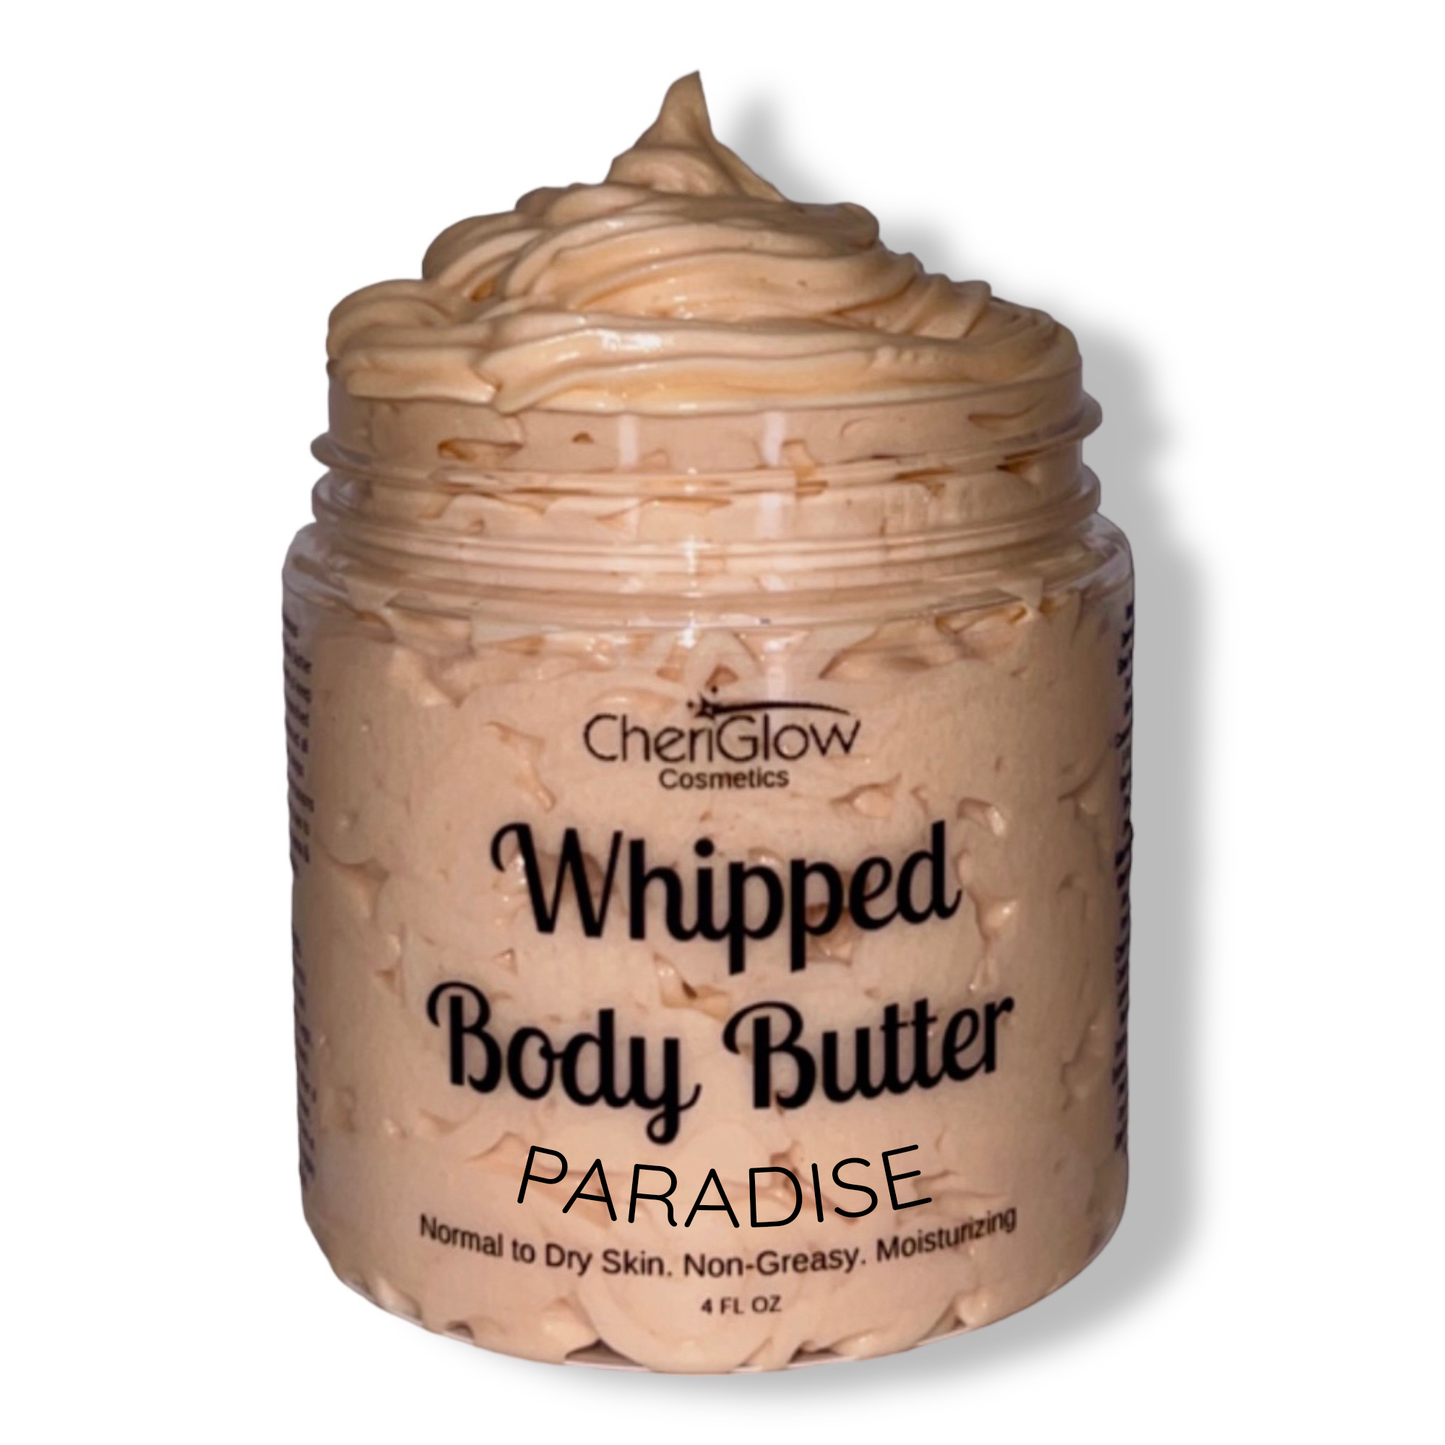 Whipped Body Butter- Paradise.